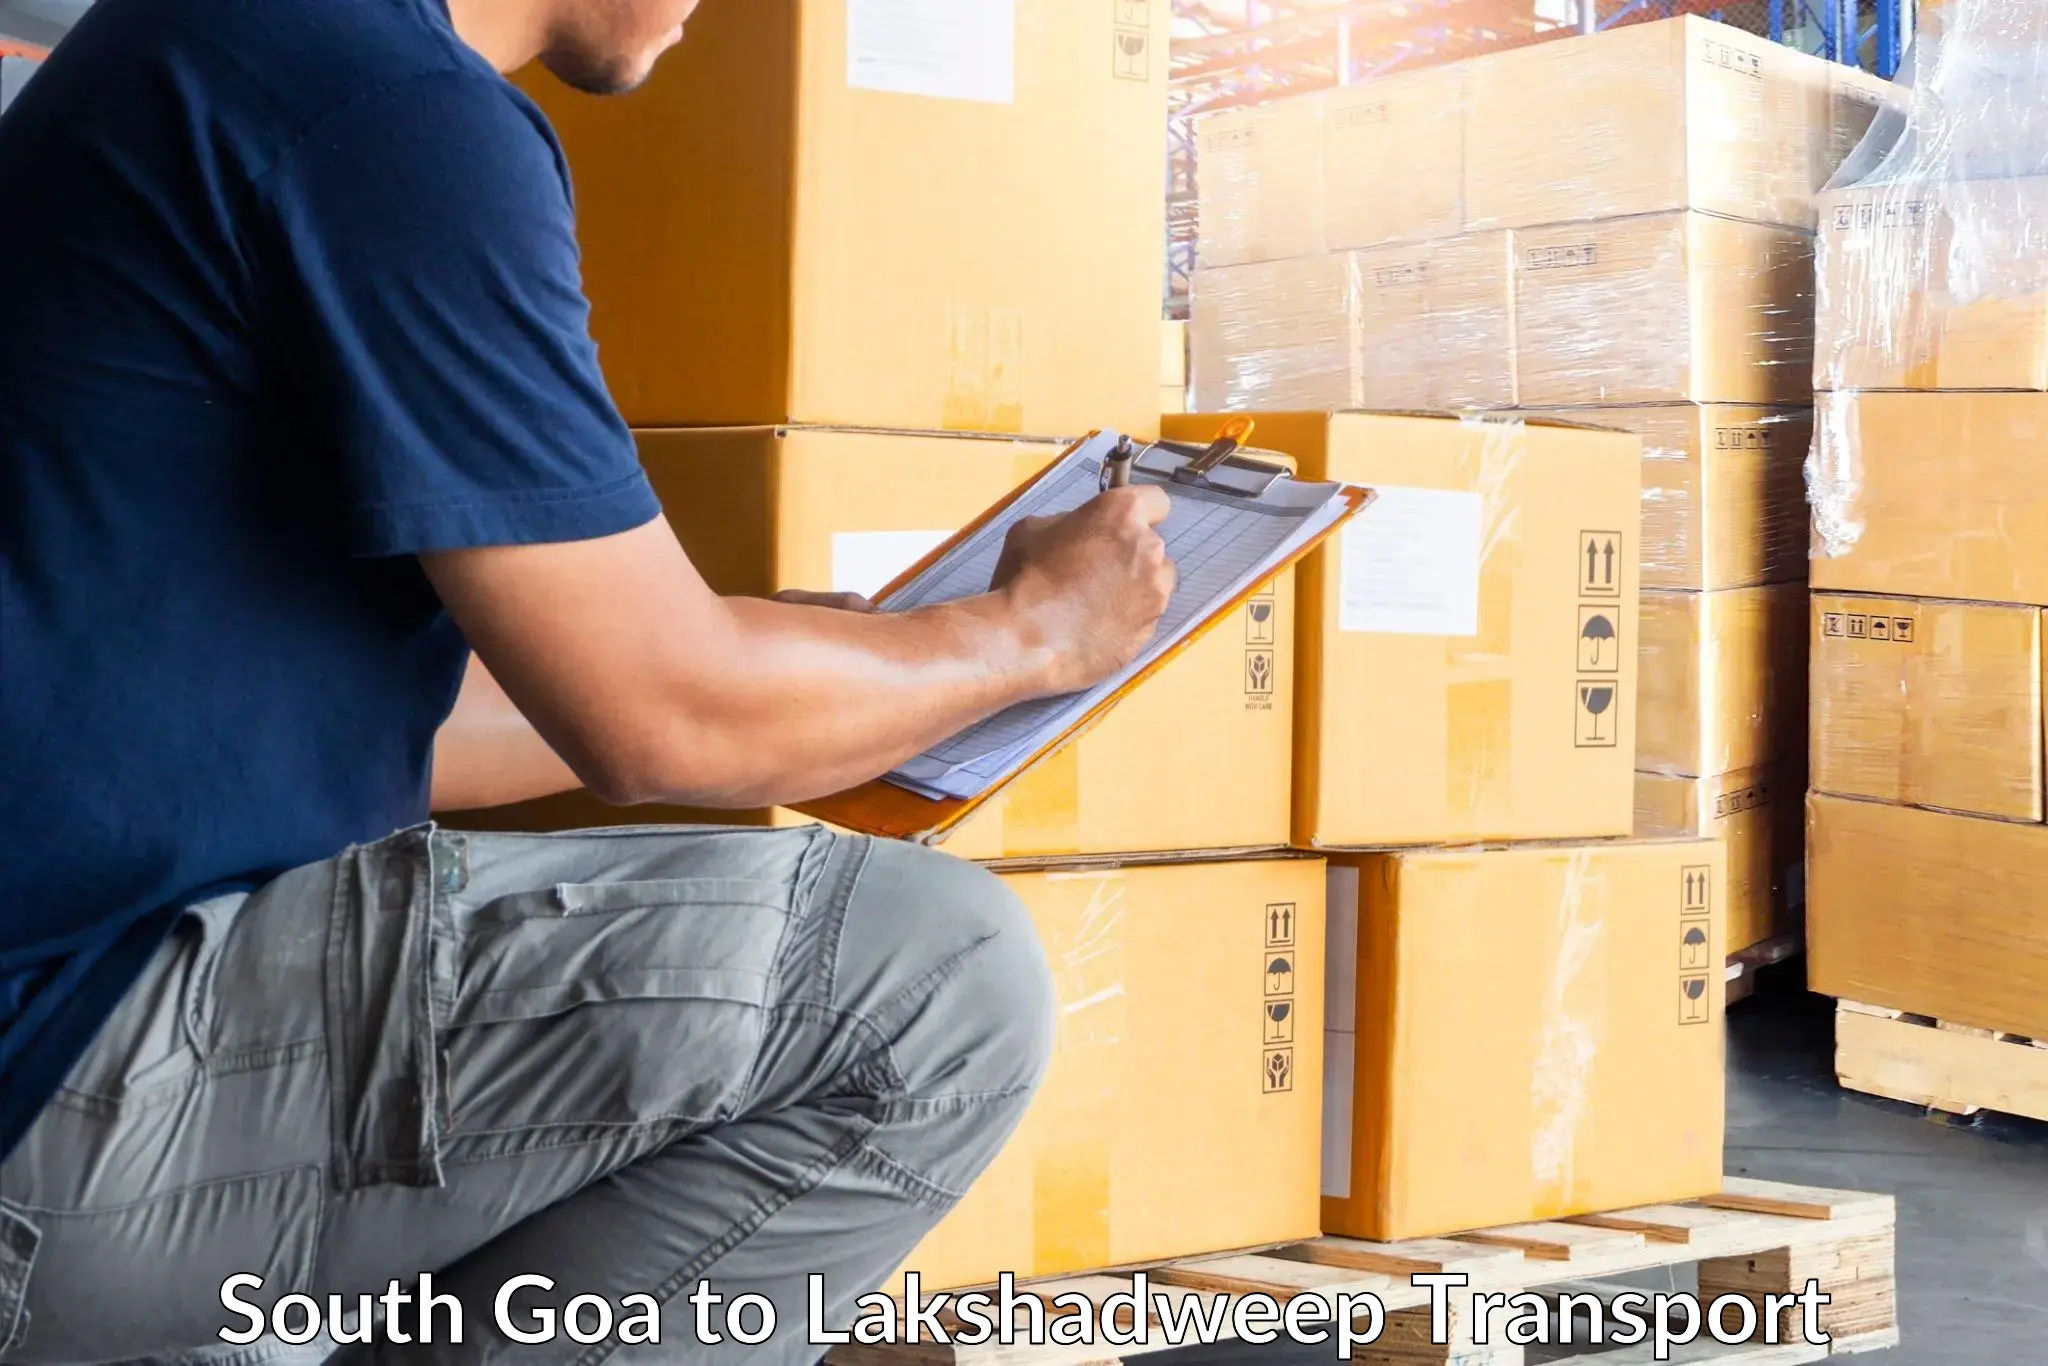 Parcel transport services South Goa to Lakshadweep